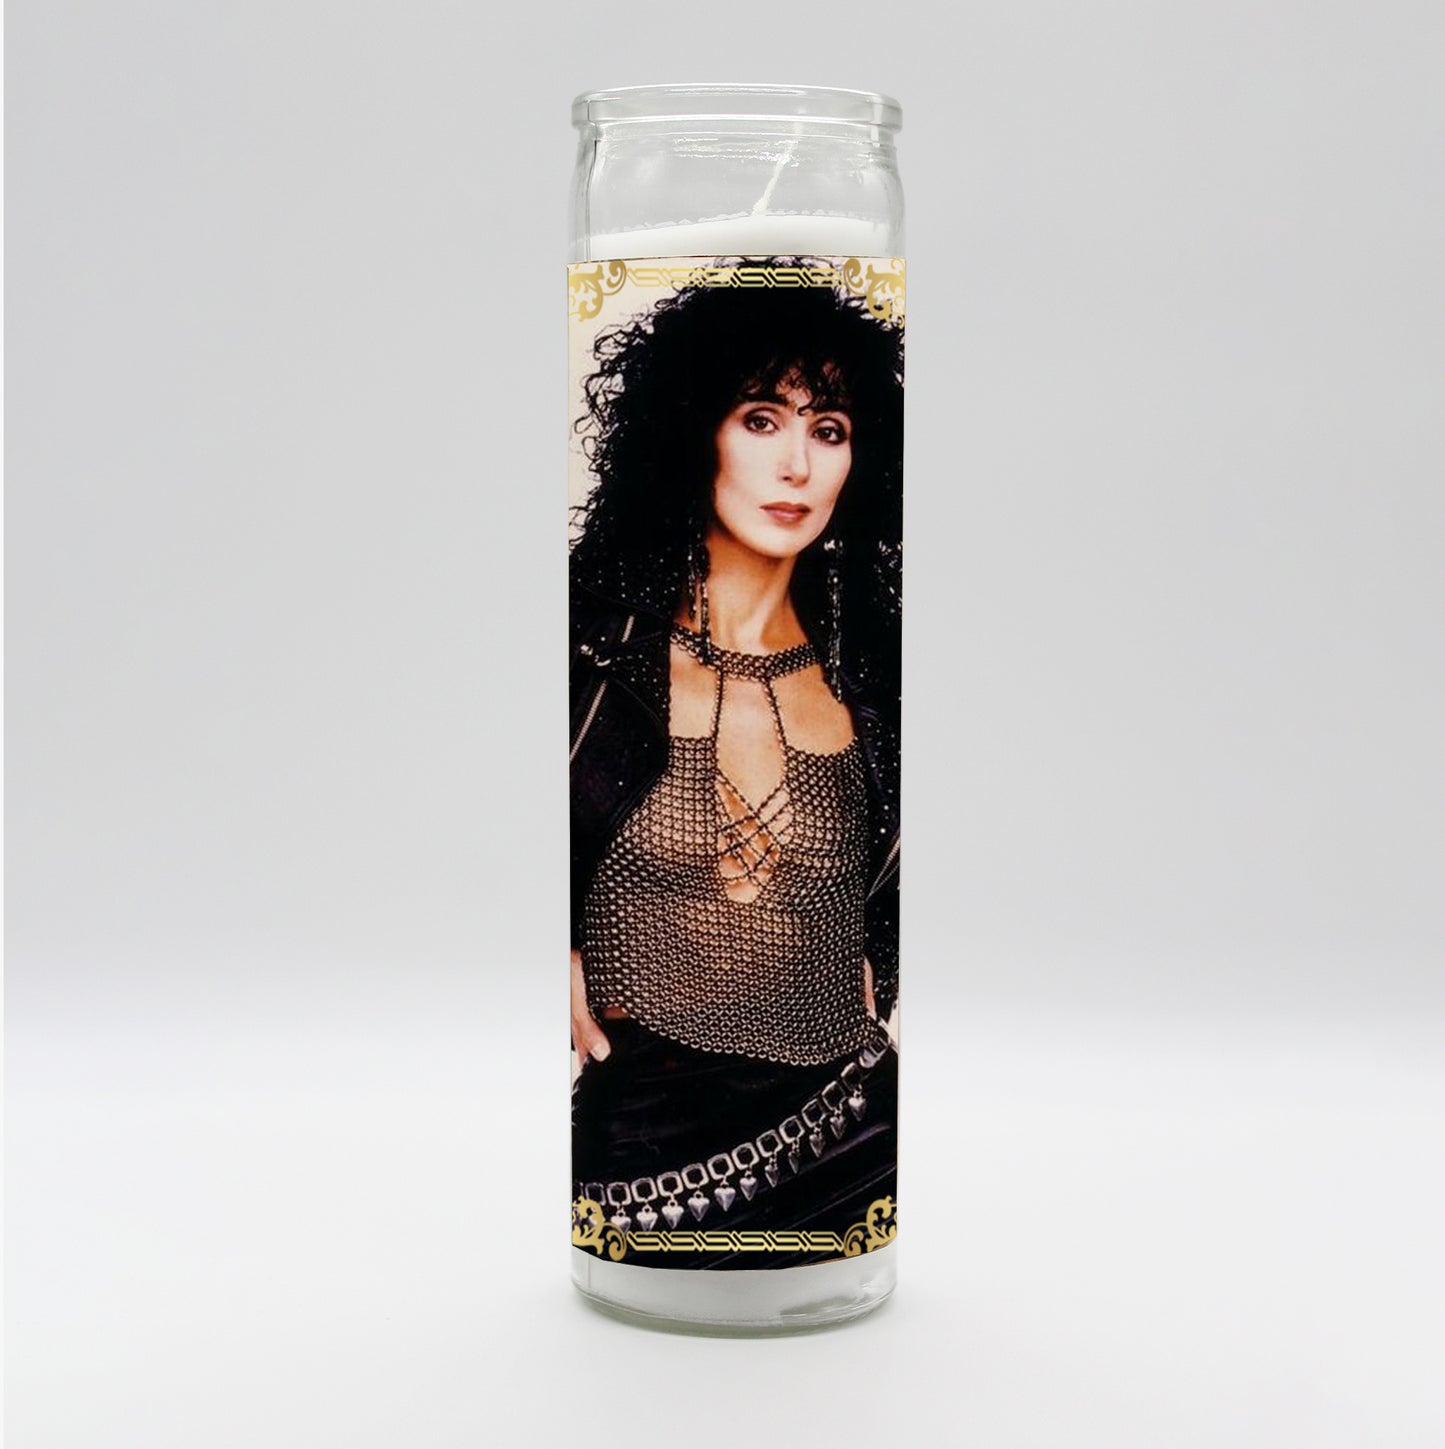 Cher Candle